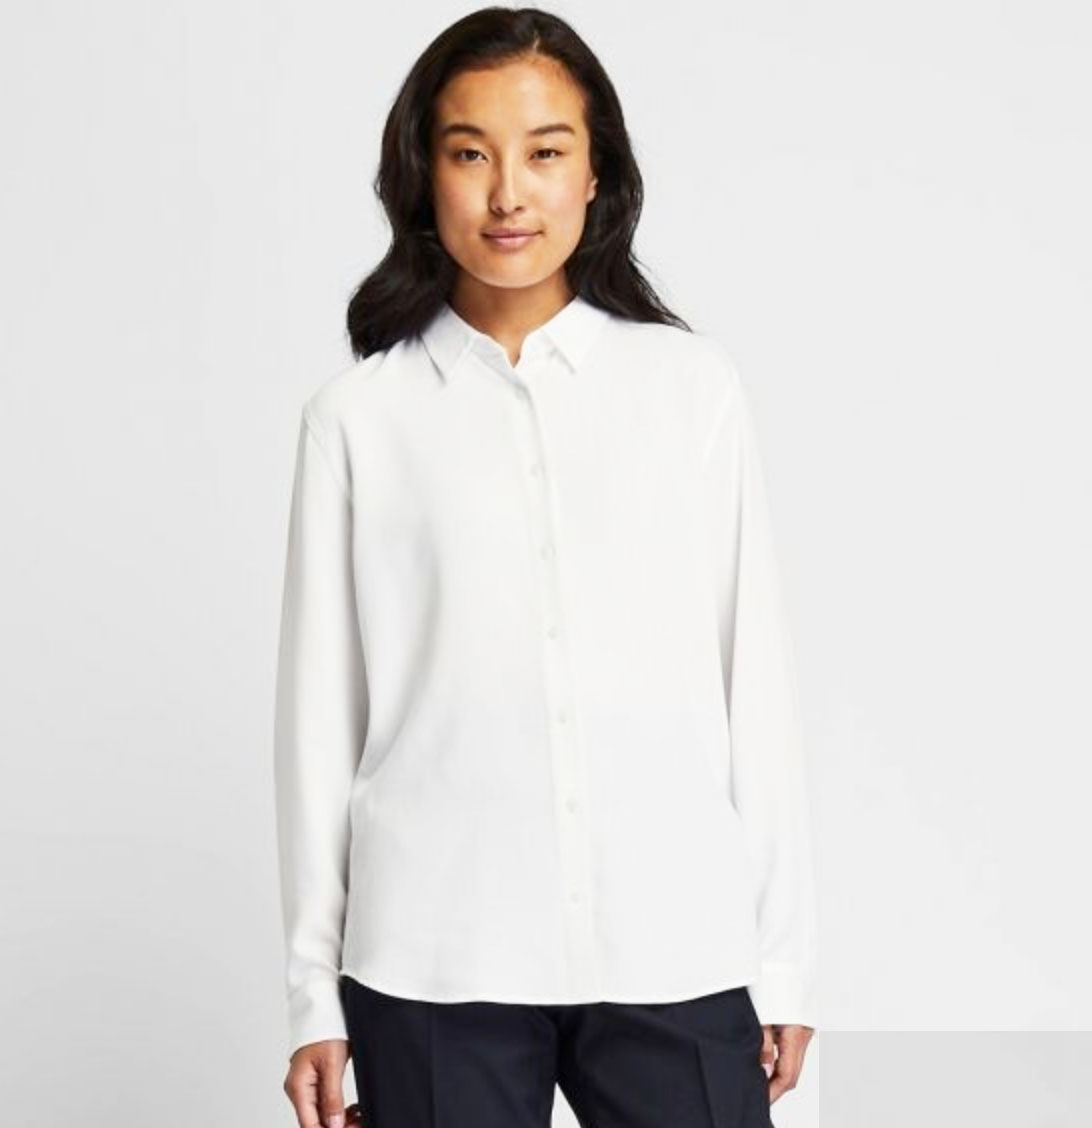 THIS SHIRT IS THE THERMOMIX OF THE FASHION WORLD